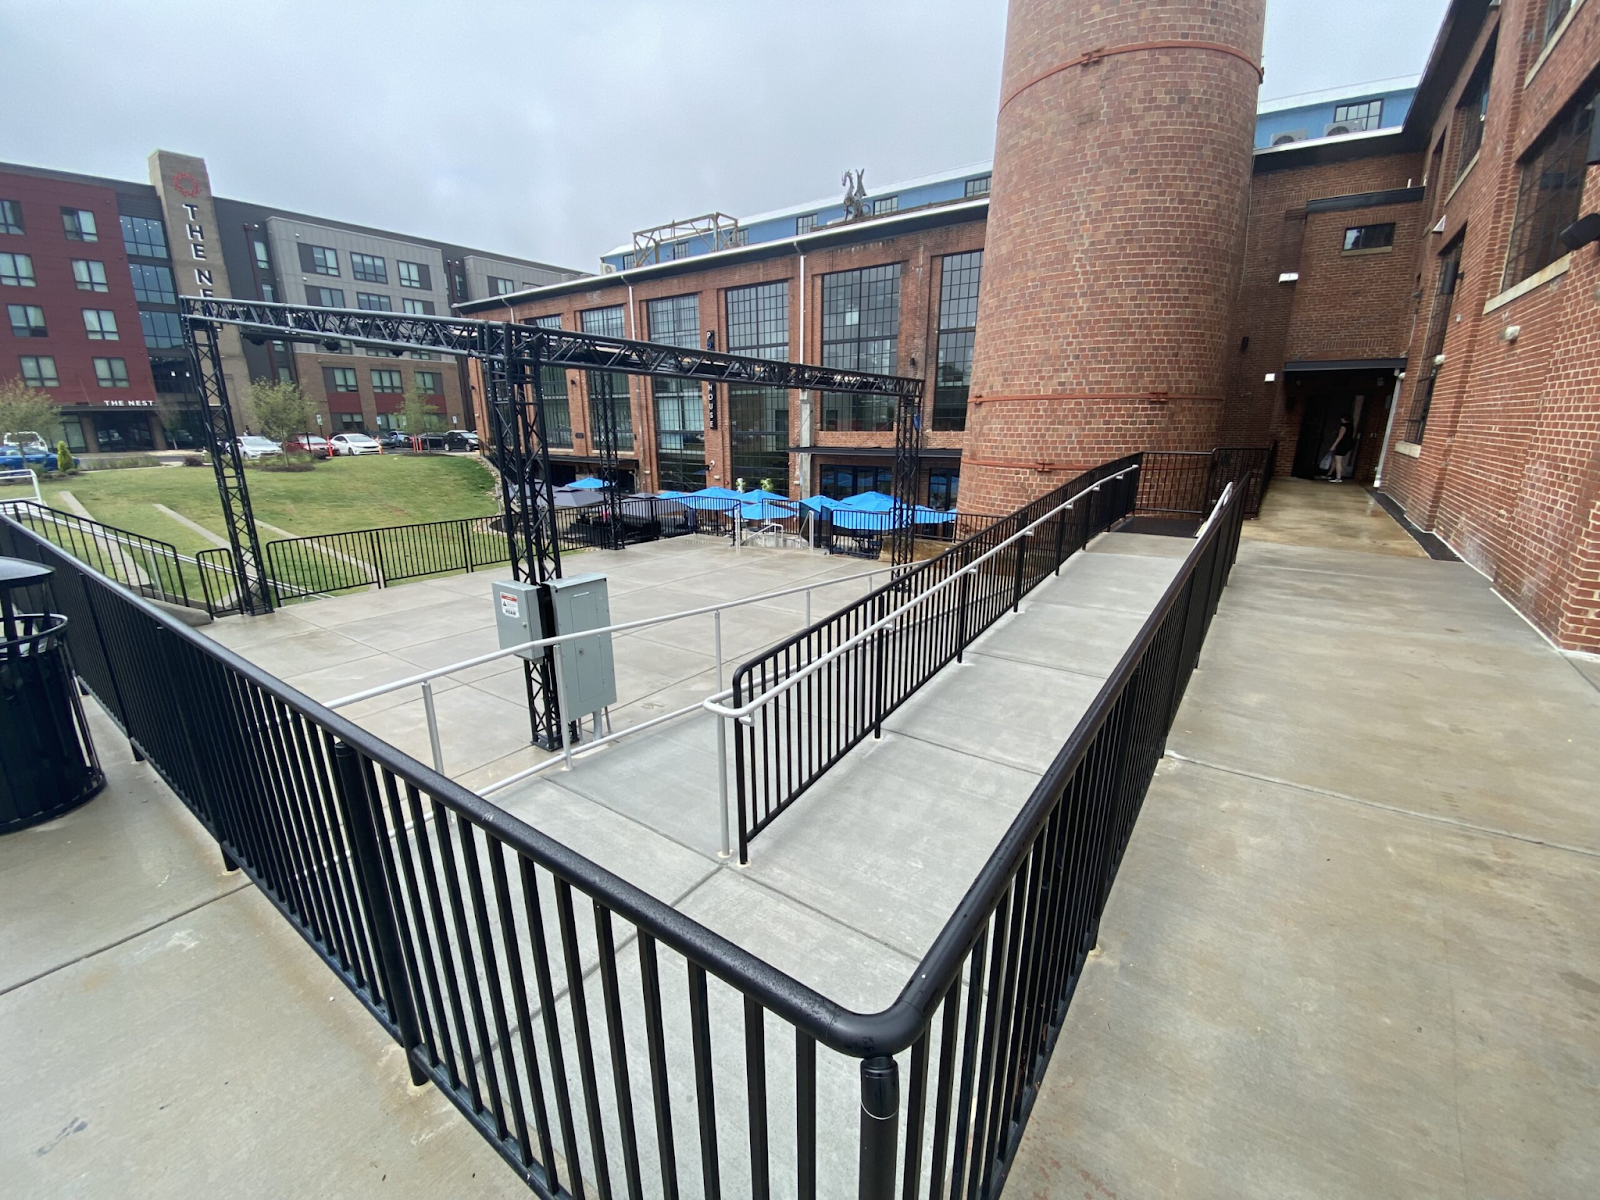 Handrails on a ramp for fall prevention.